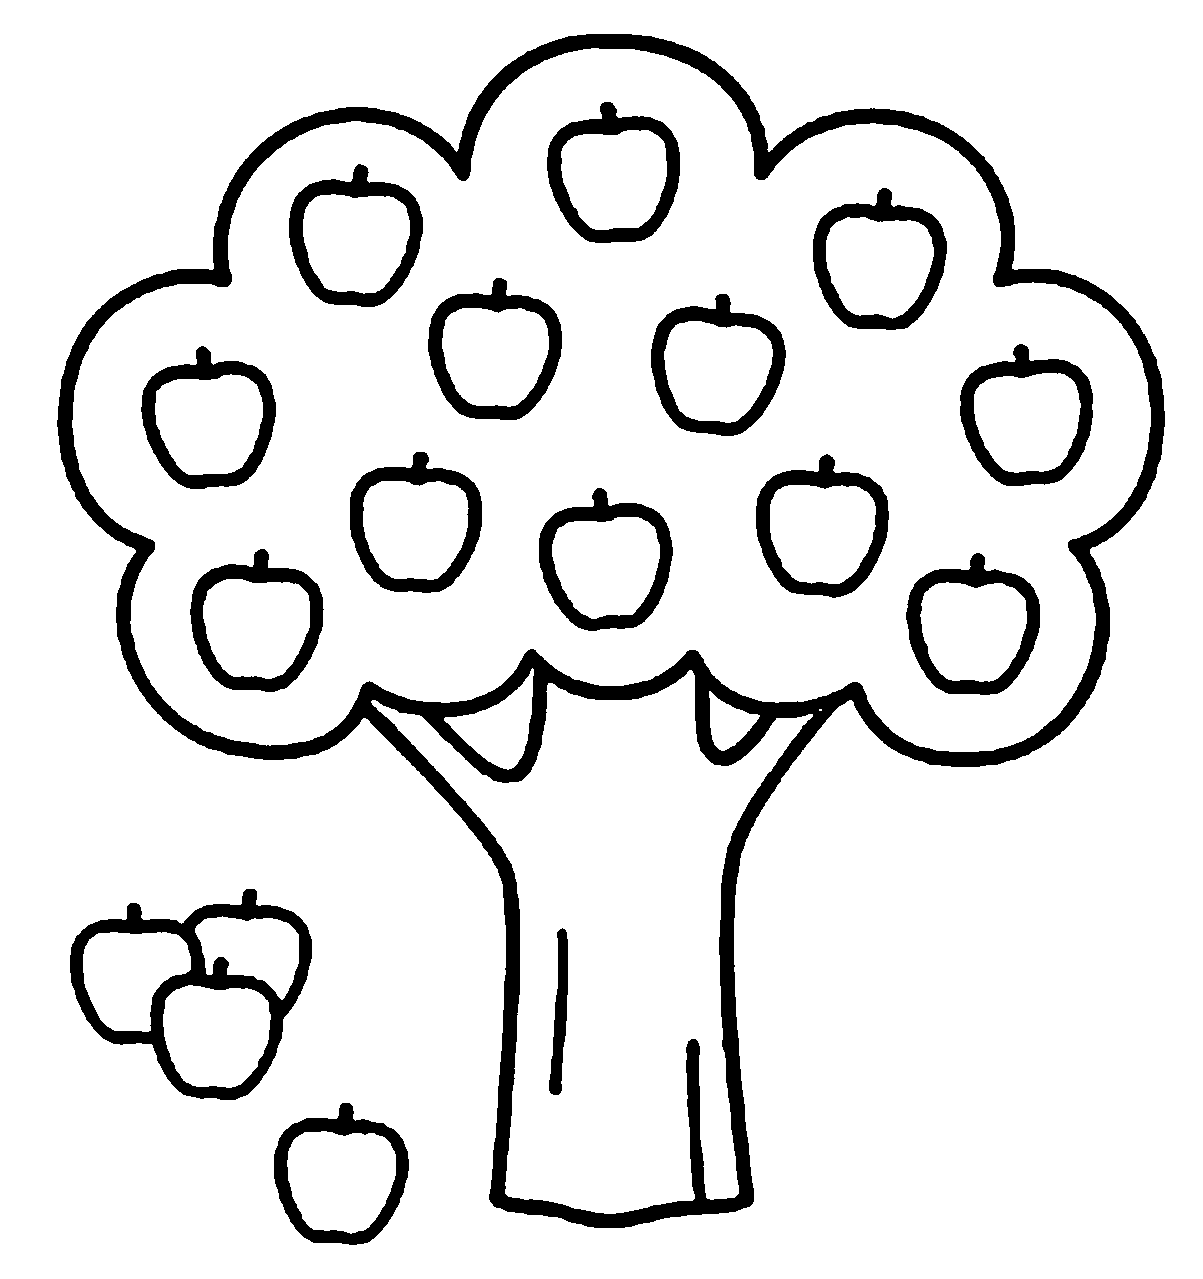 Coloring Page Of An Apple Tree - Coloring Style Pages